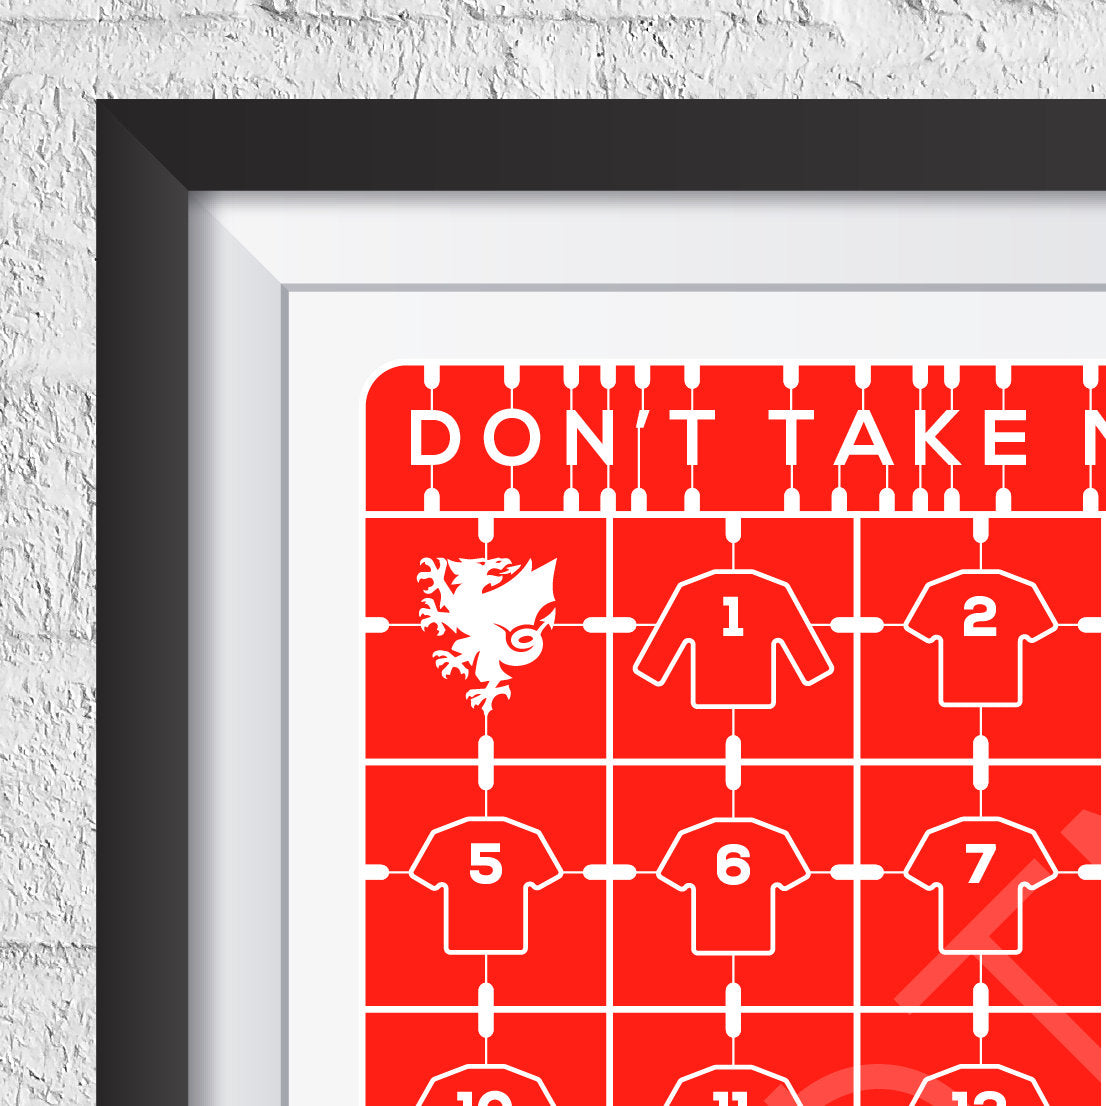 Wales Euro 2016 'Don't Take Me Home' Squad Print - Man of The Match Football